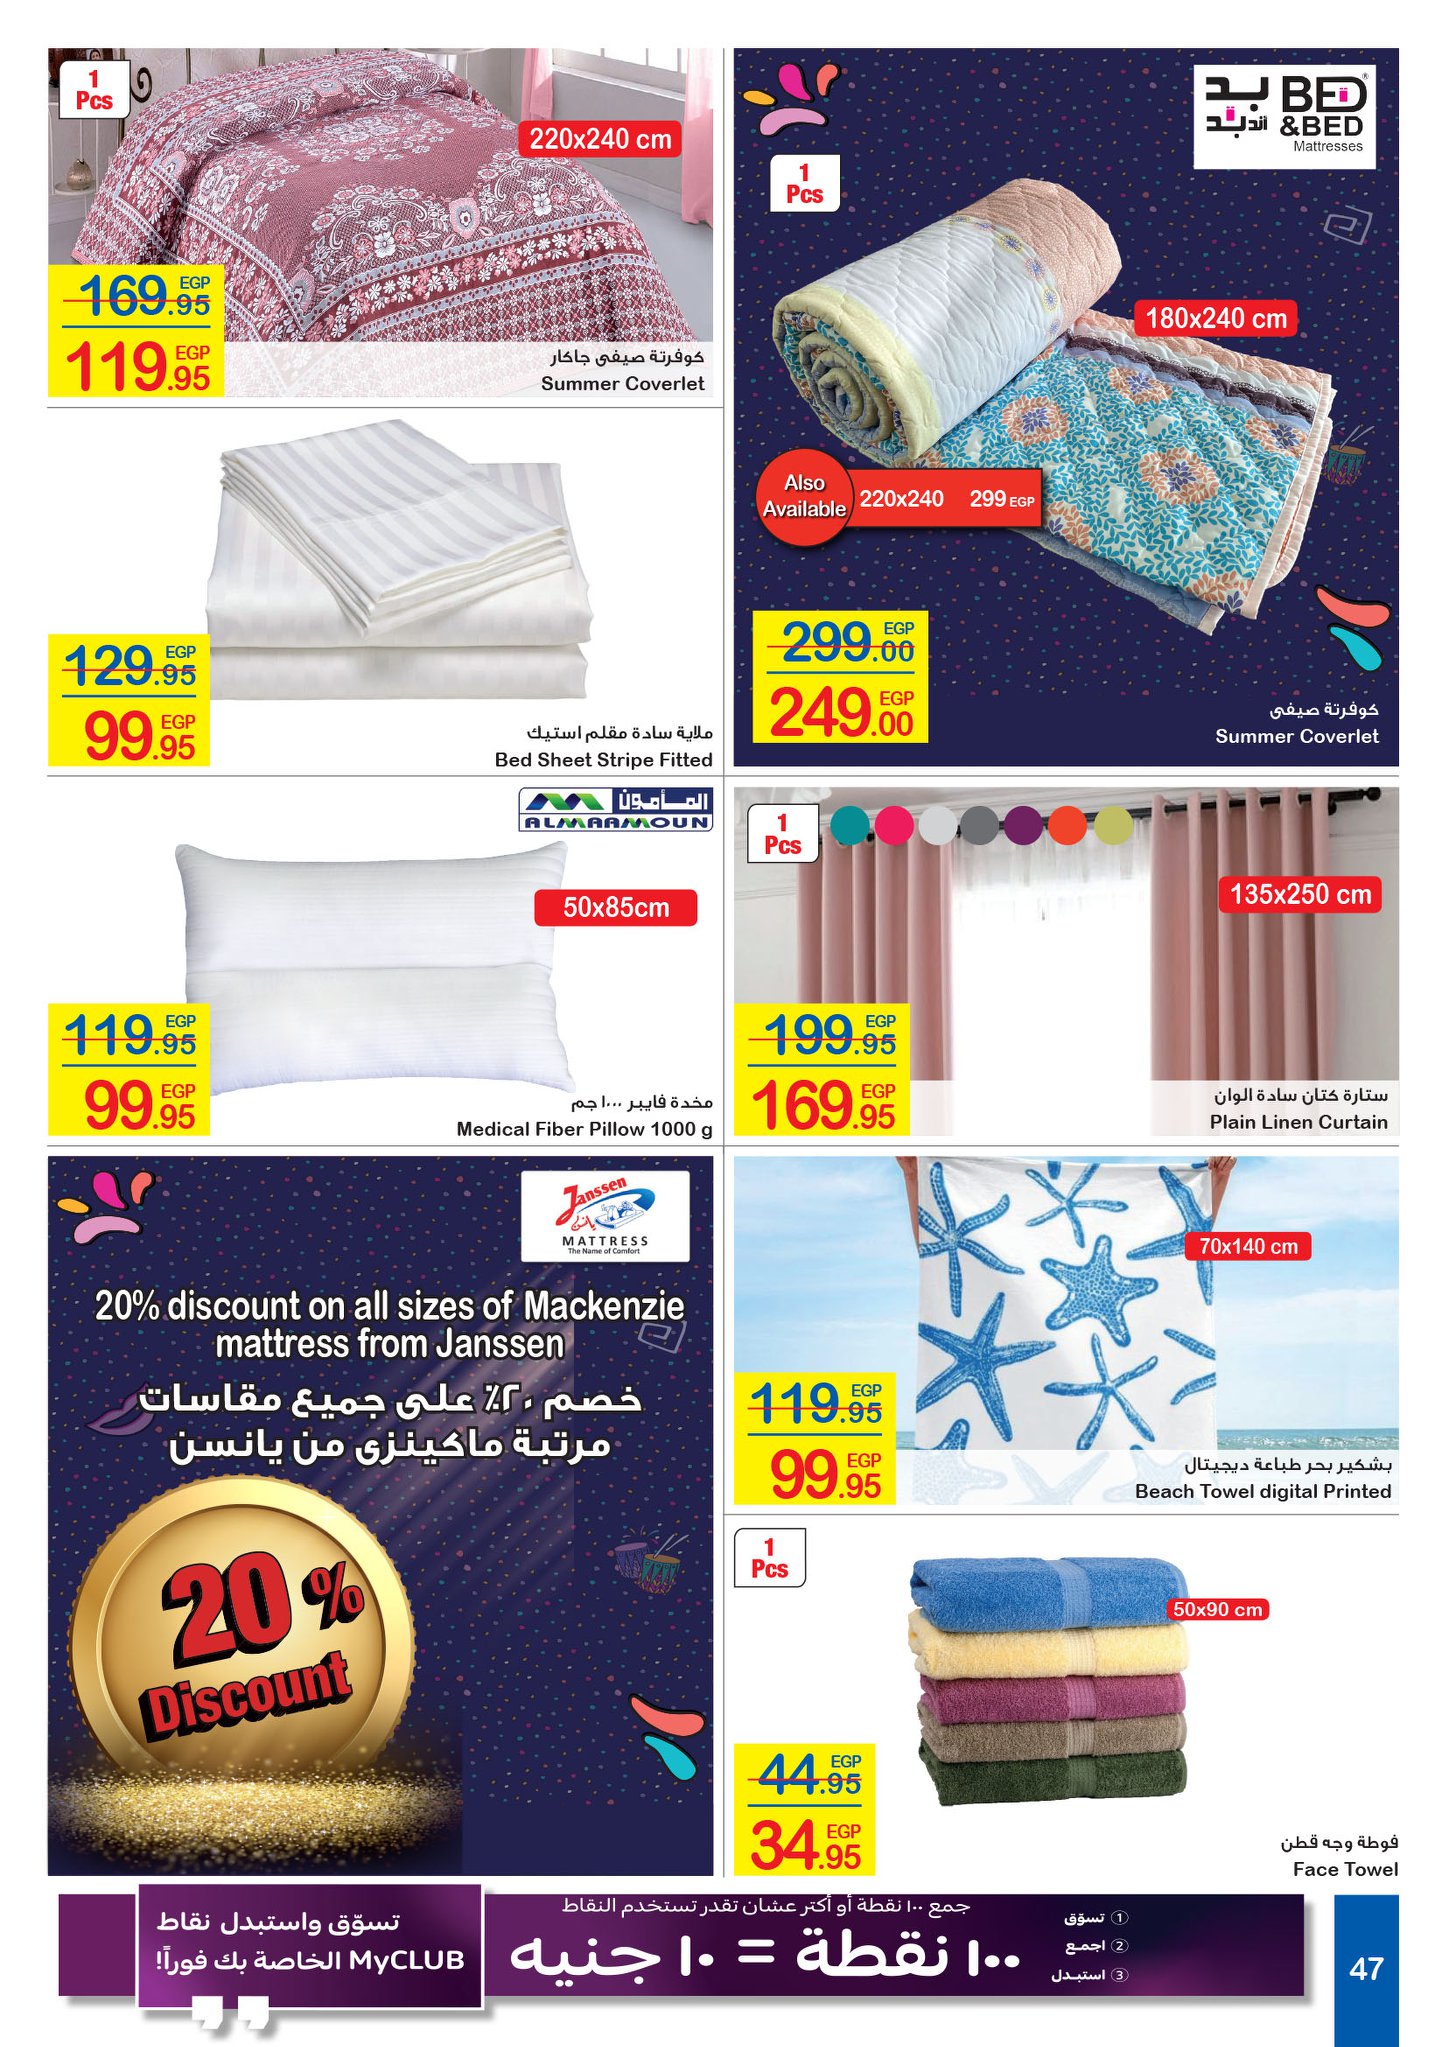 Carrefour Flyer from 16/7 till 27/7 | Carrefour Egypt 46